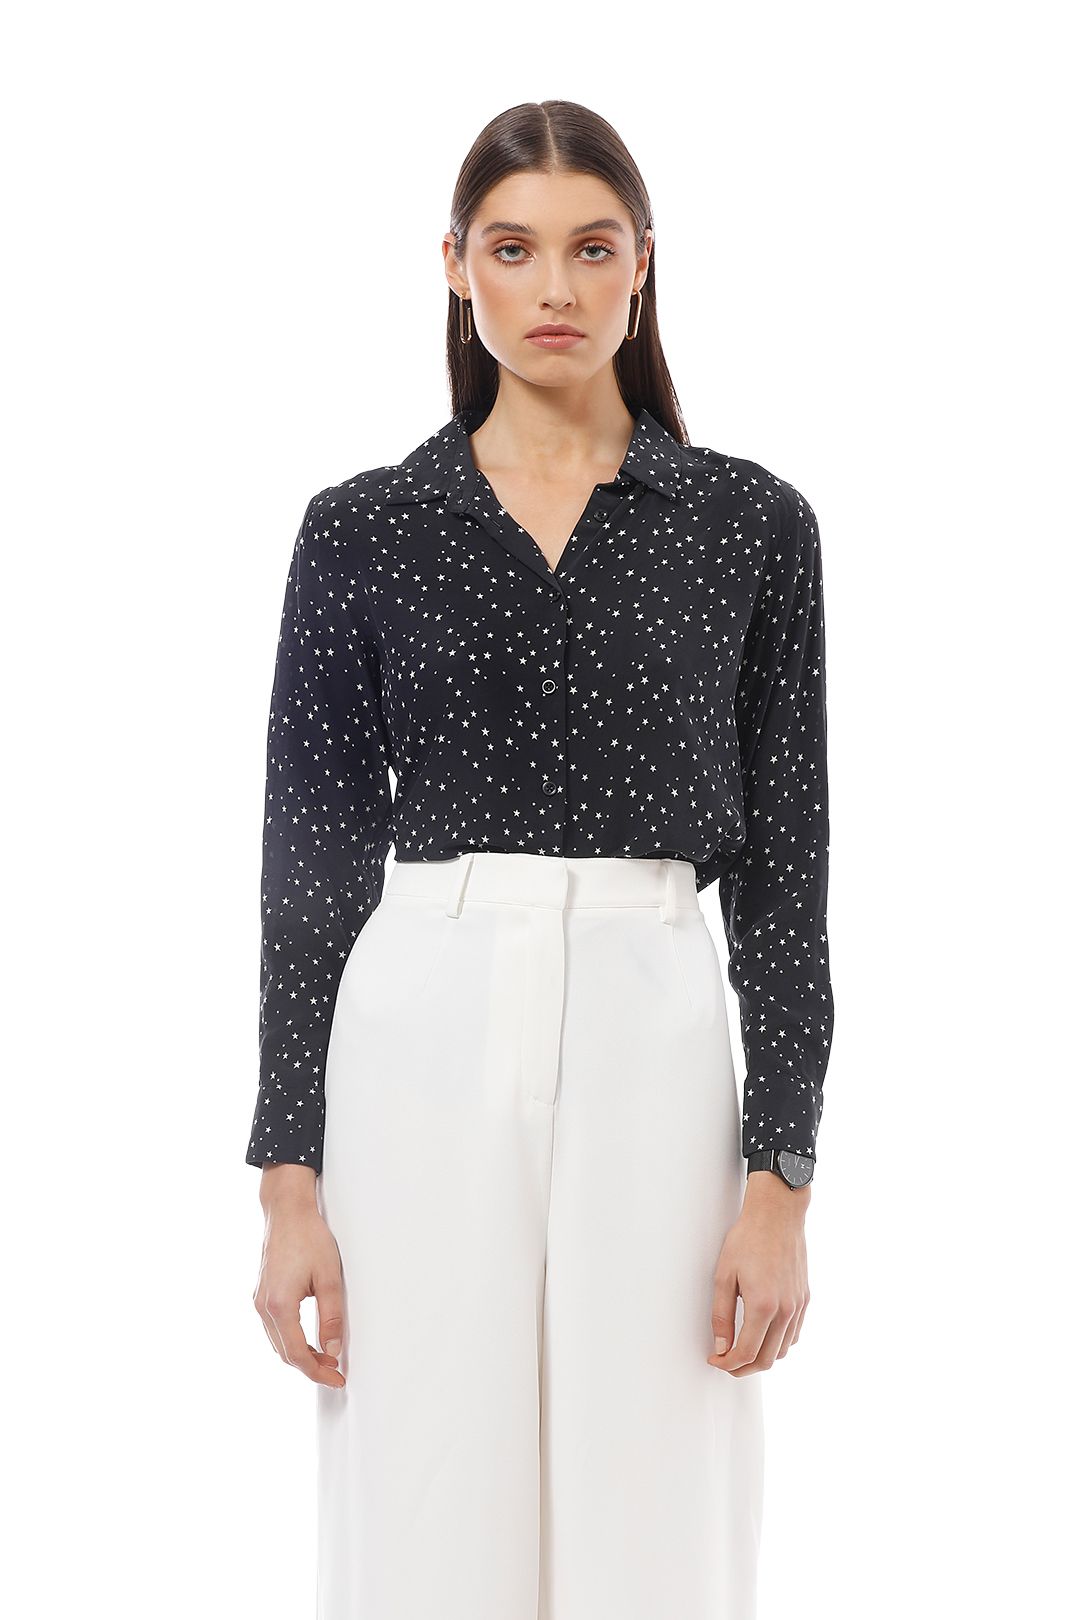 The Fable - Starry Starry Night Blouse - Black -  Close Up